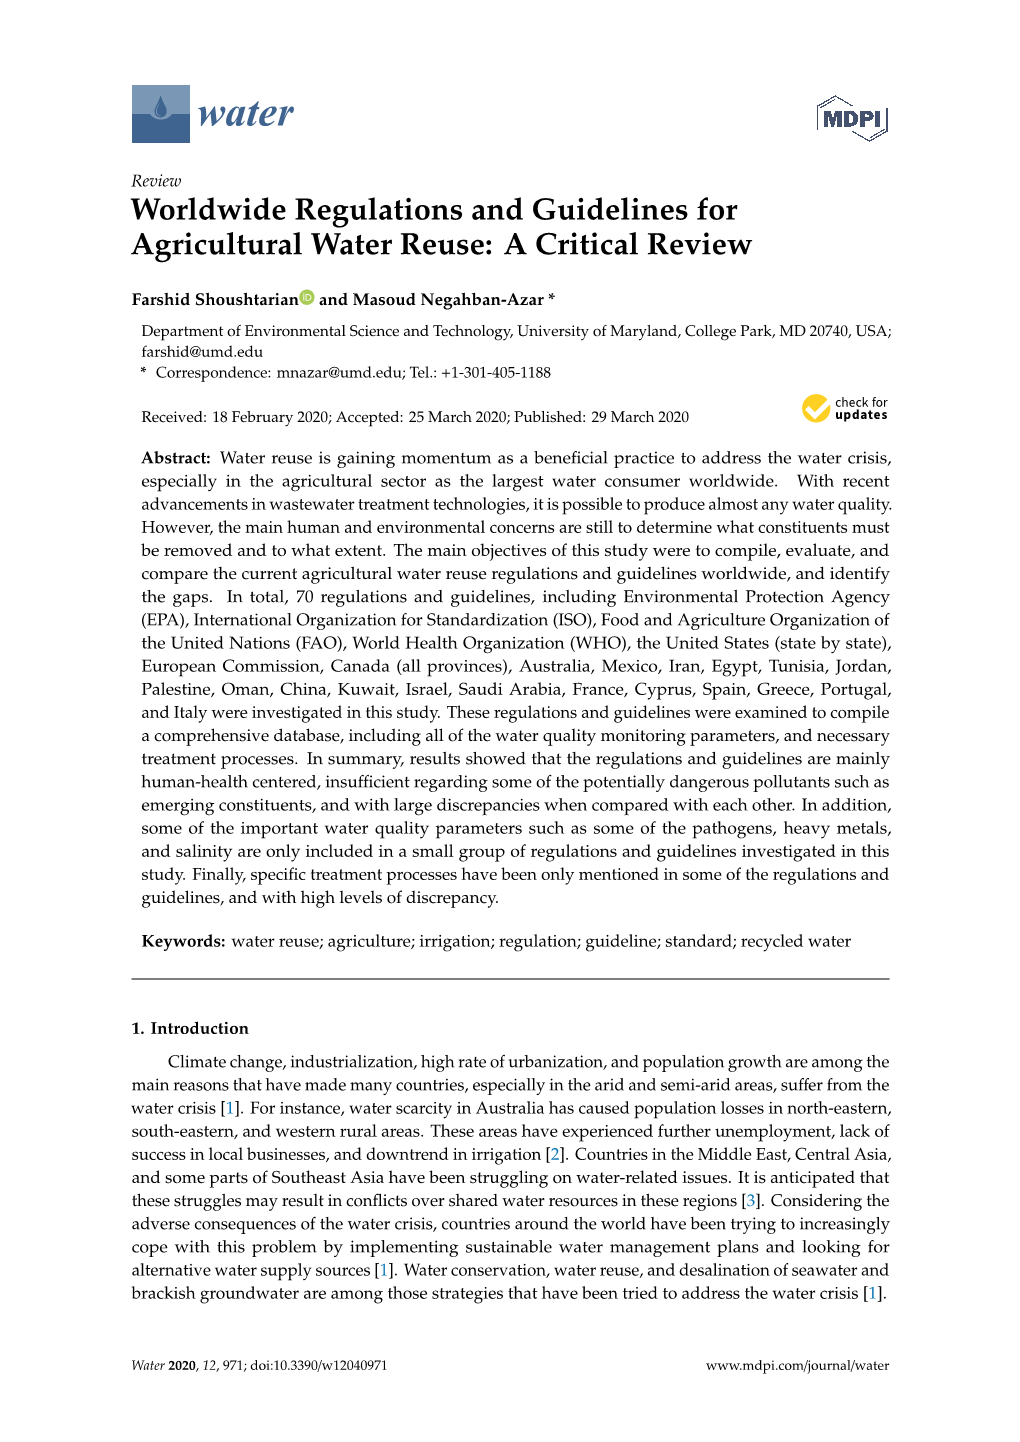 Worldwide Regulations and Guidelines for Agricultural Water Reuse: a Critical Review